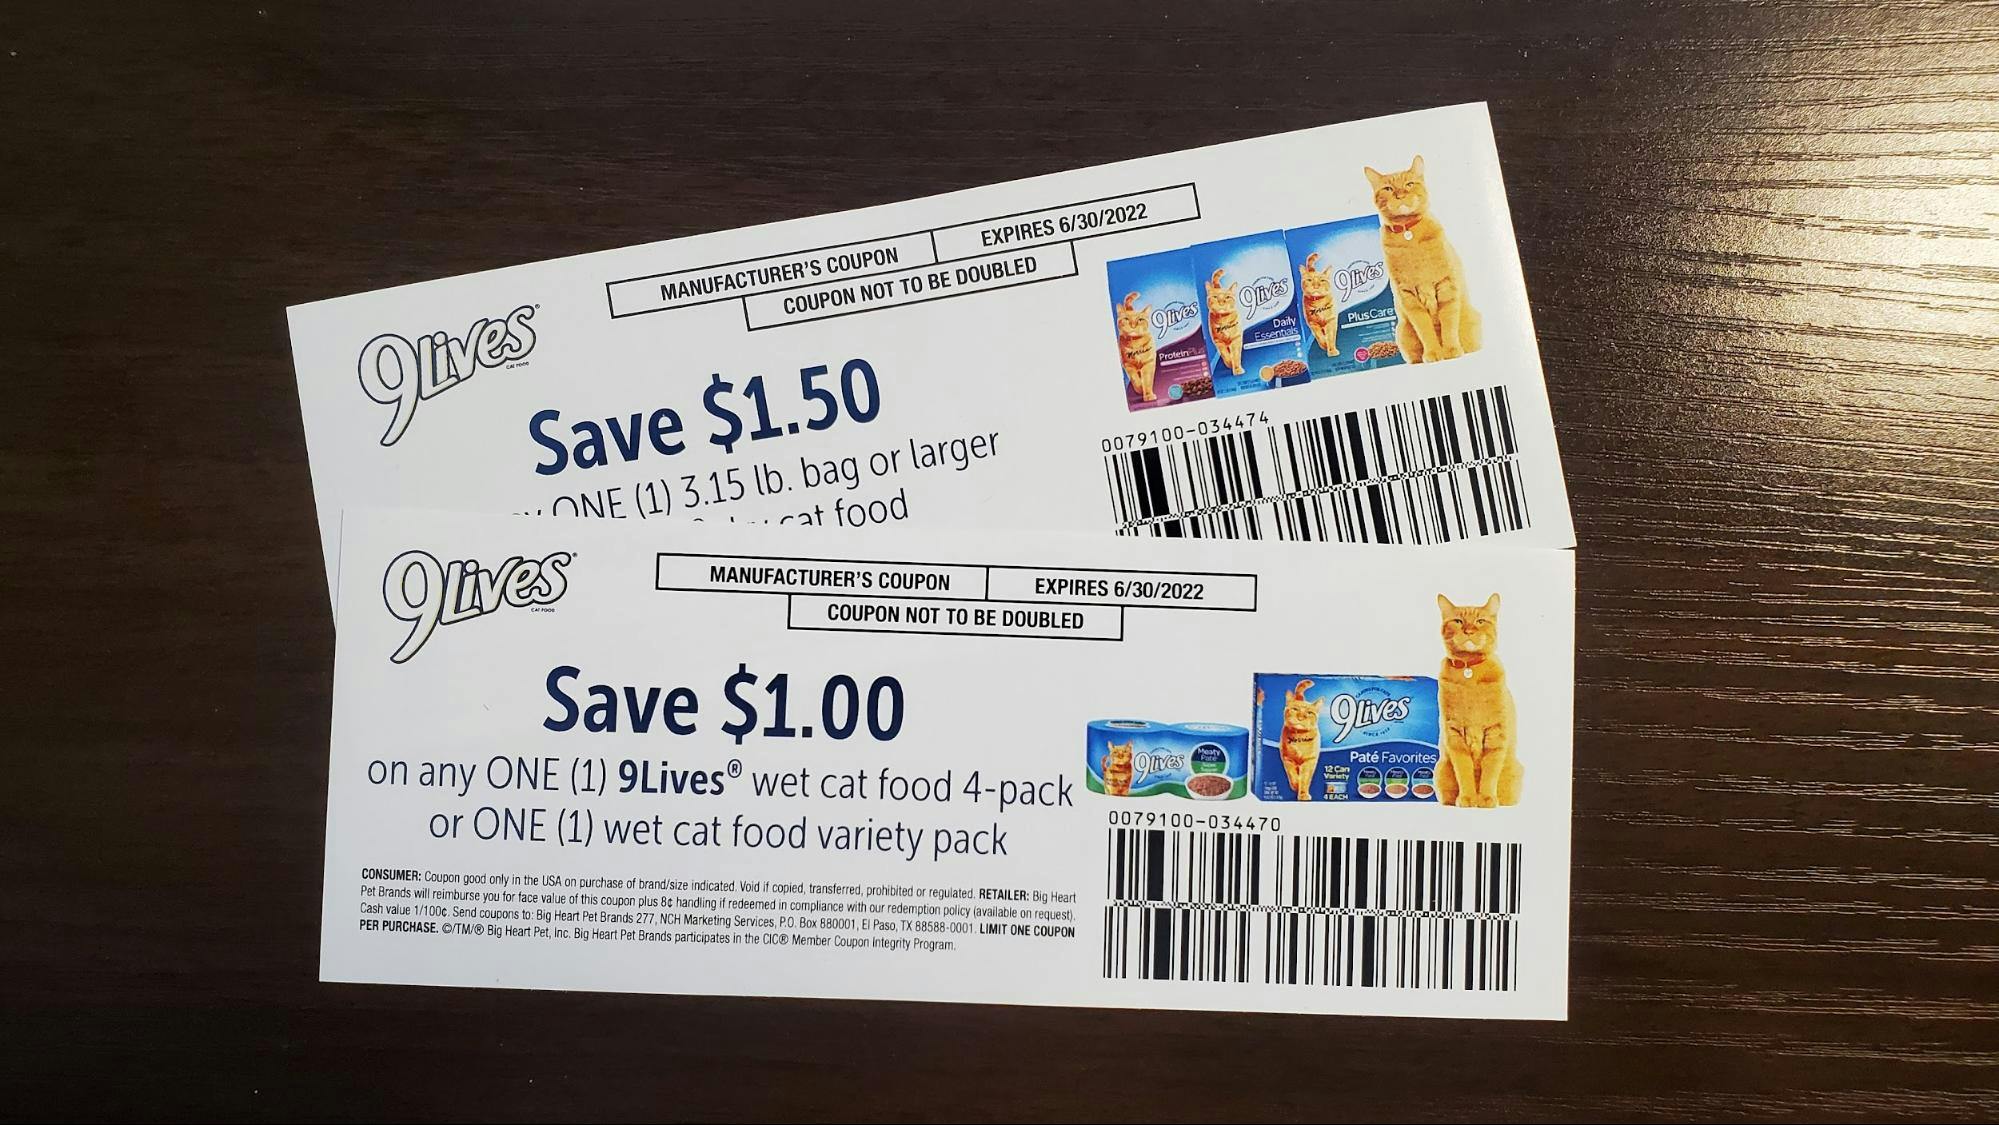 Free 9 Lives coupons by mail